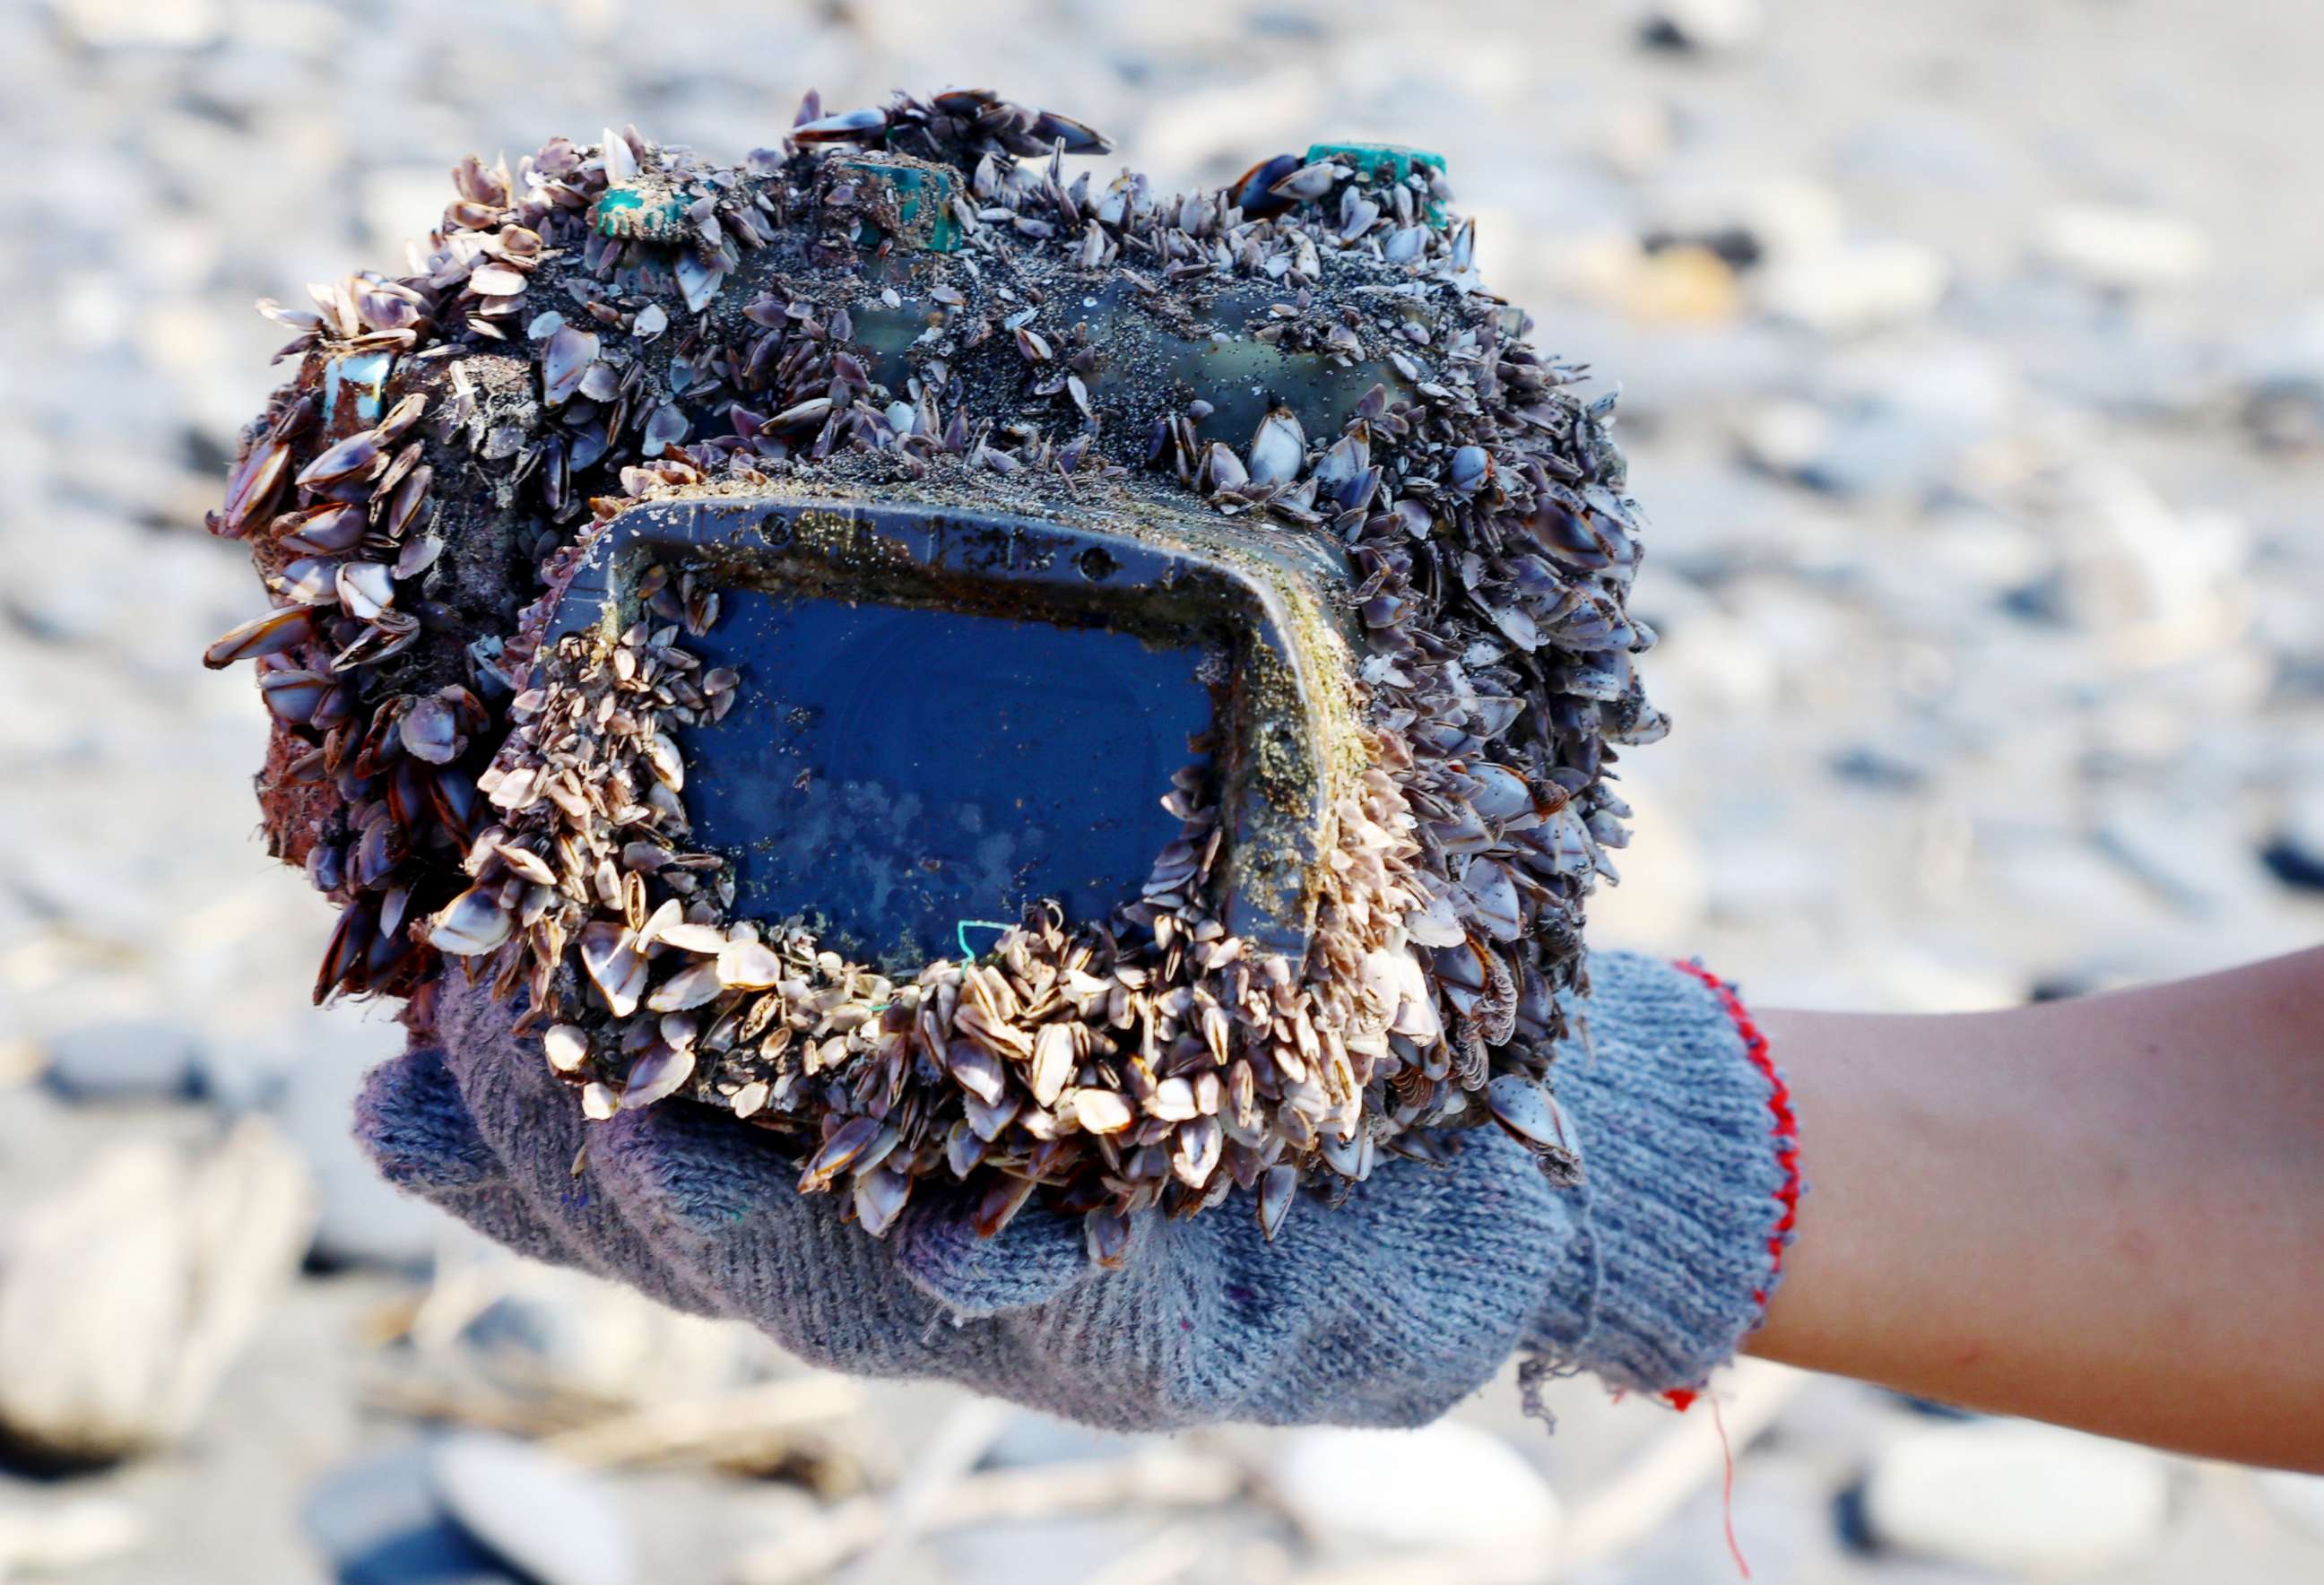 PHOTO: A handout photo made available by teacher Park Lee shows a barnacle-covered camera in a water-proof case that washed up on a beach in Ilan County, northeast Taiwan, March 27, 2018. 